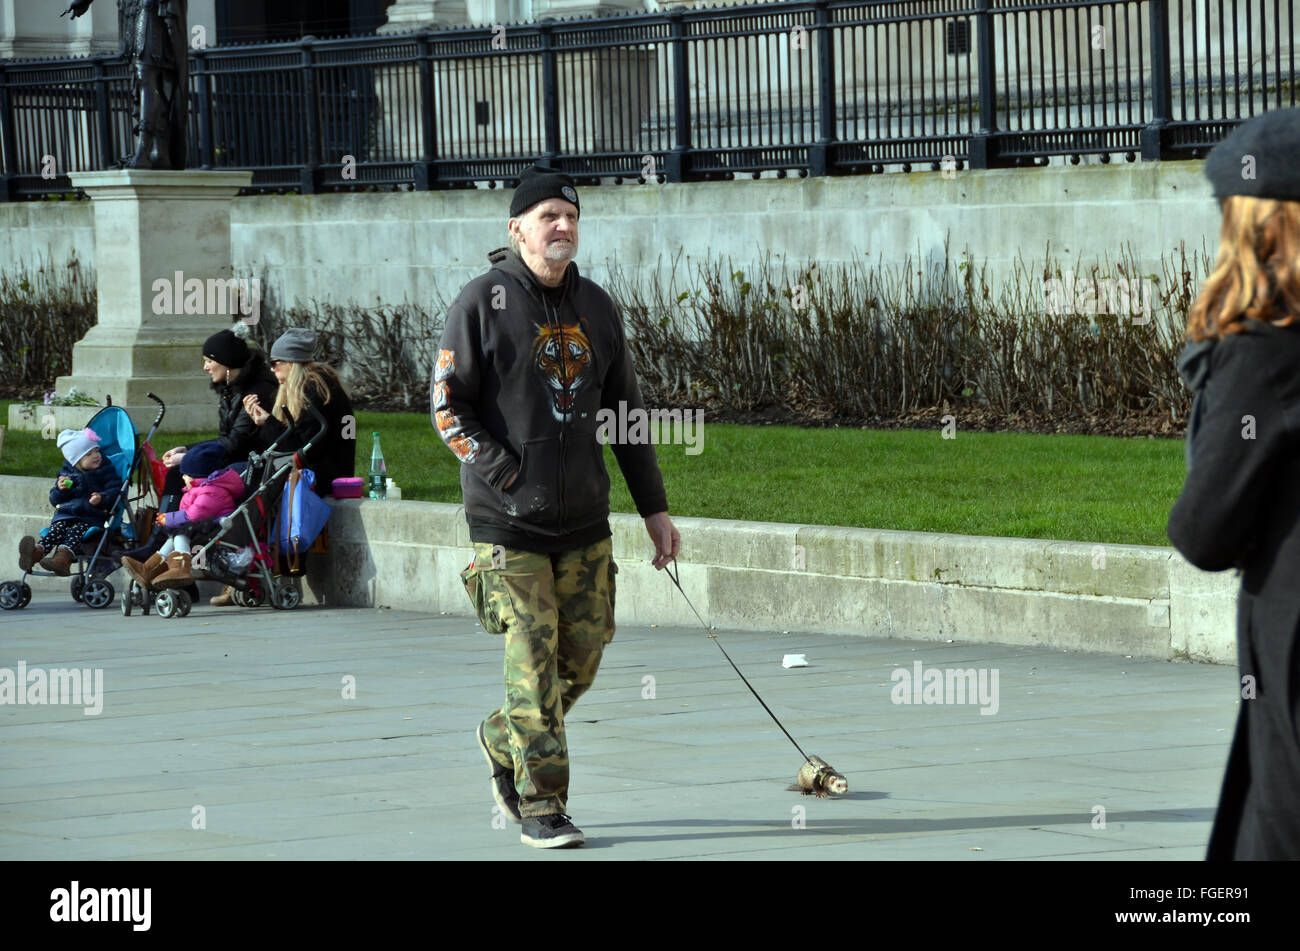 London, UK, 18 February 2016, a man walks a pet ferret on a lead in front of the National Gallery in Trafalgar Square. Stock Photo